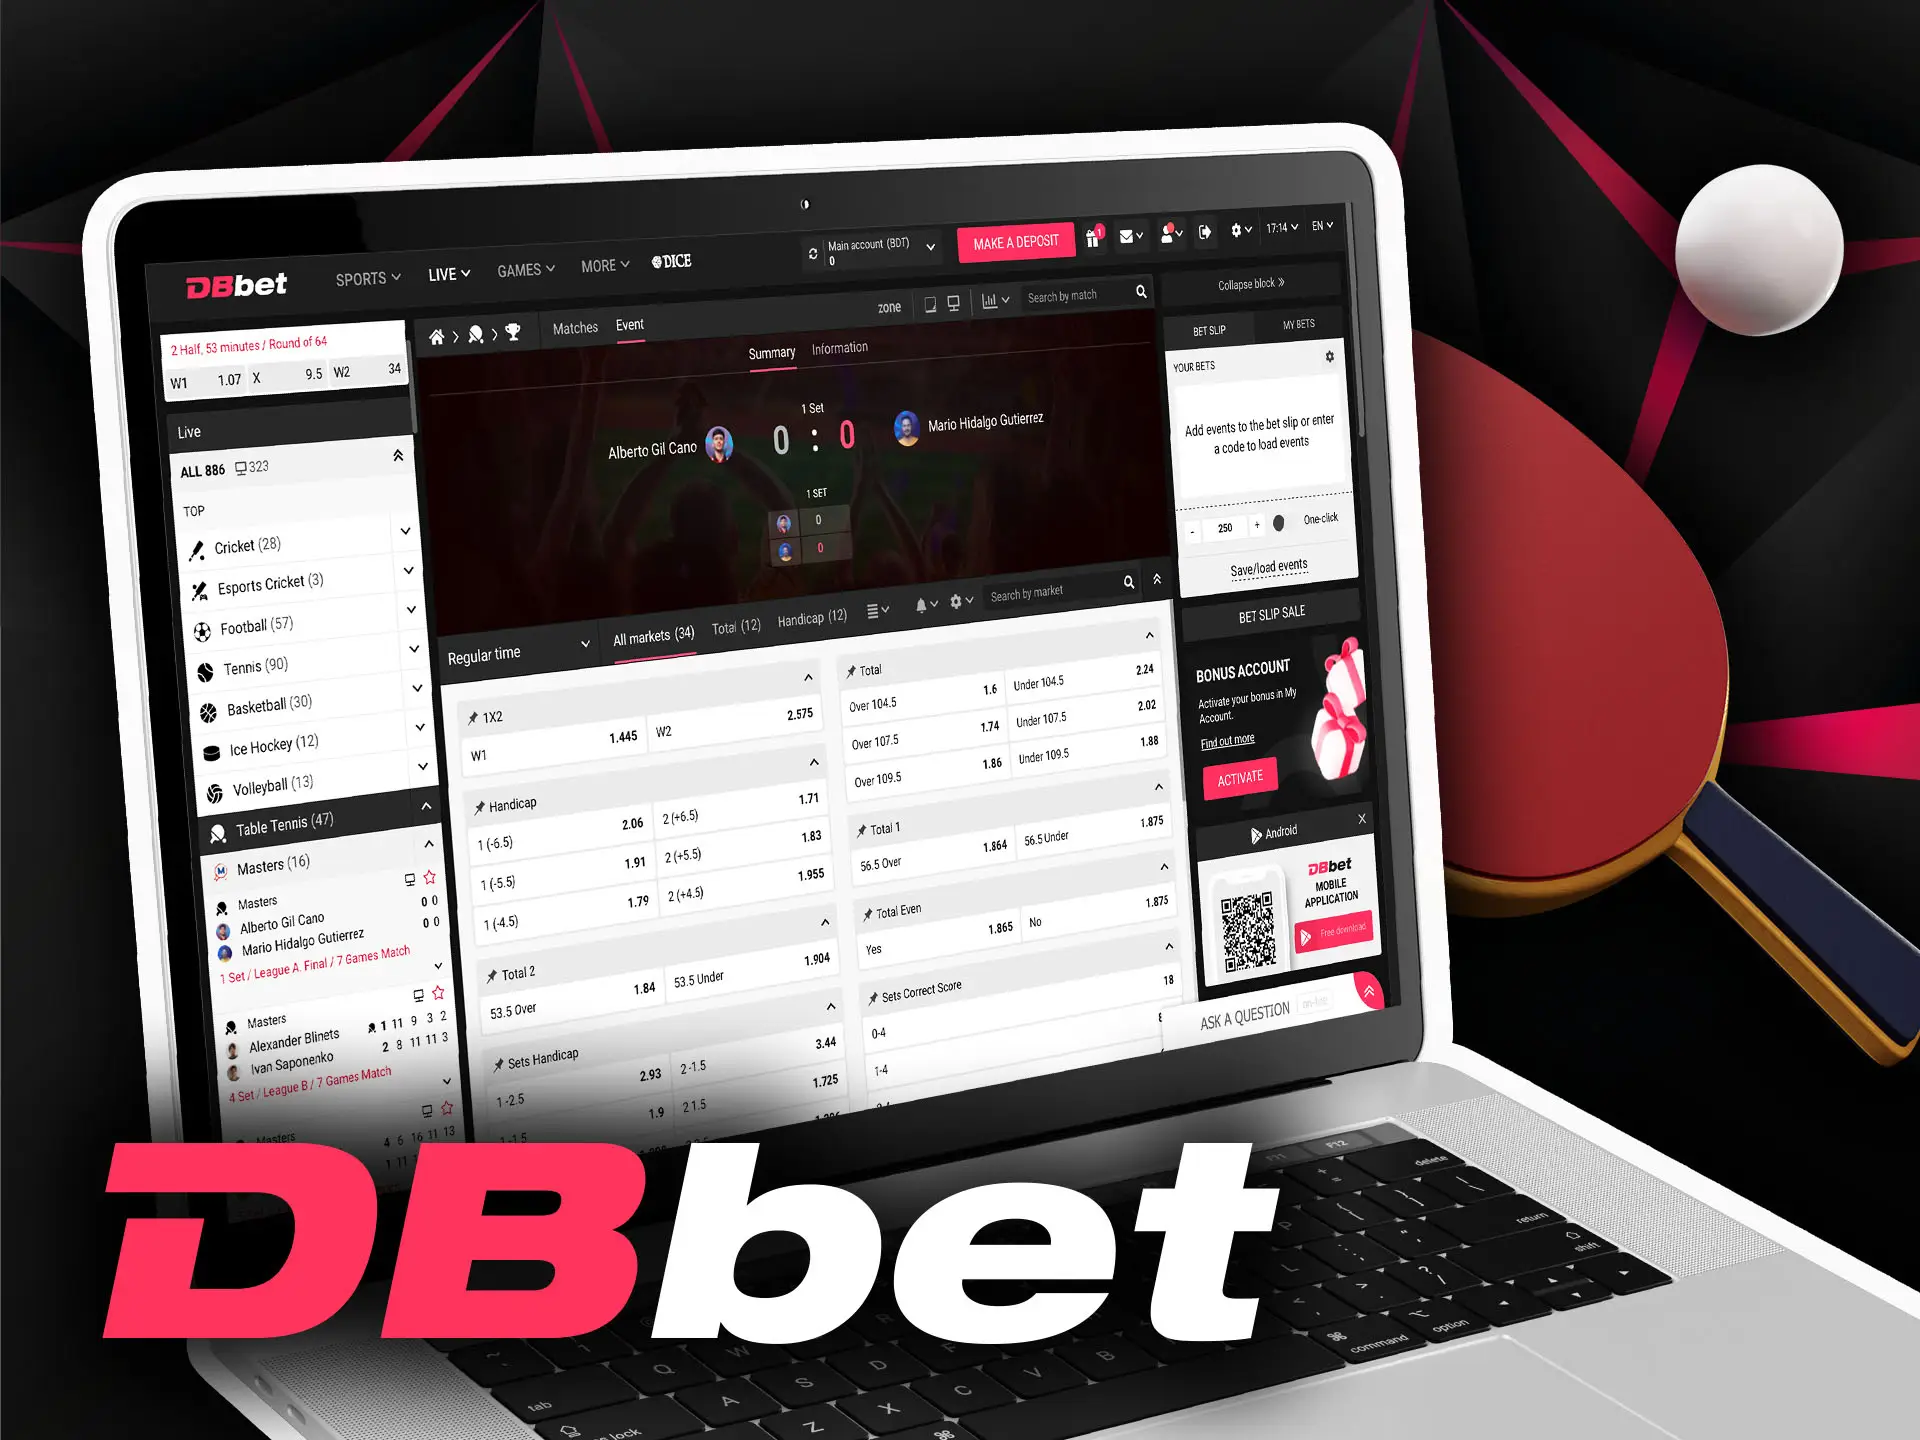 There are a lot of table tennis matches to bet on DBbet.